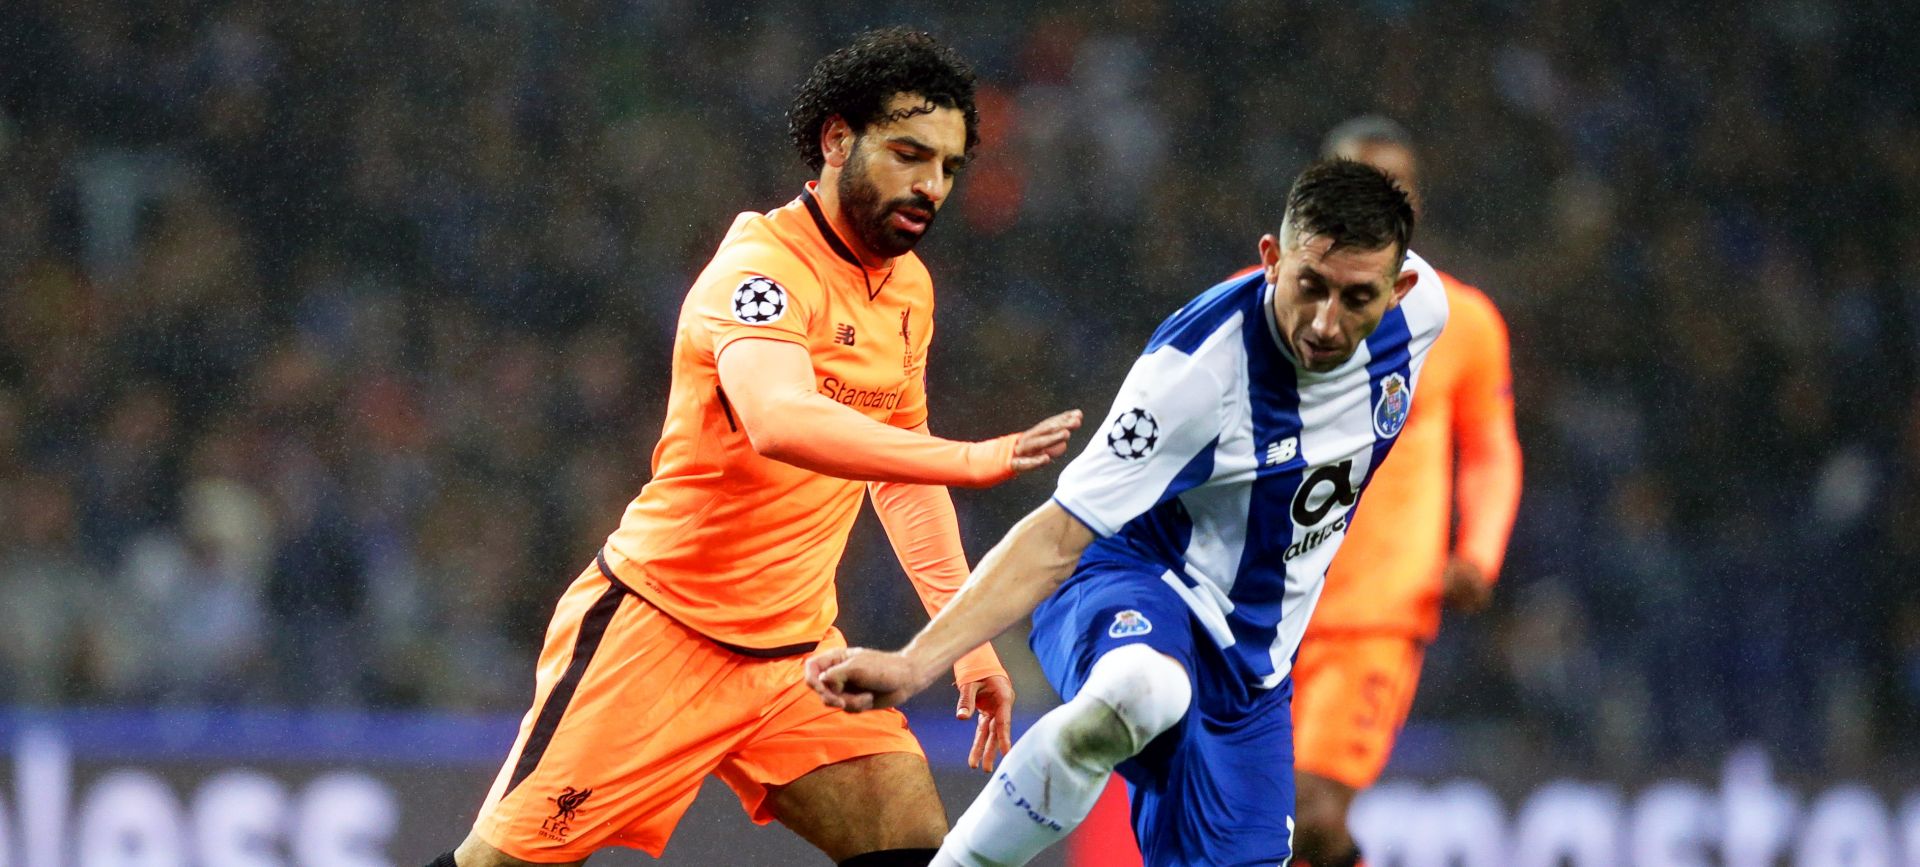 epa06525746 FC Porto's Hector Herrera (R) in action against Liverpool's Mohamed Salah (L) during the UEFA Champions League round of 16, first leg soccer match between FC Porto and Liverpool FC at Dragao stadium in Porto, Portugal, 14 February 2018.  EPA/JOSE COELHO